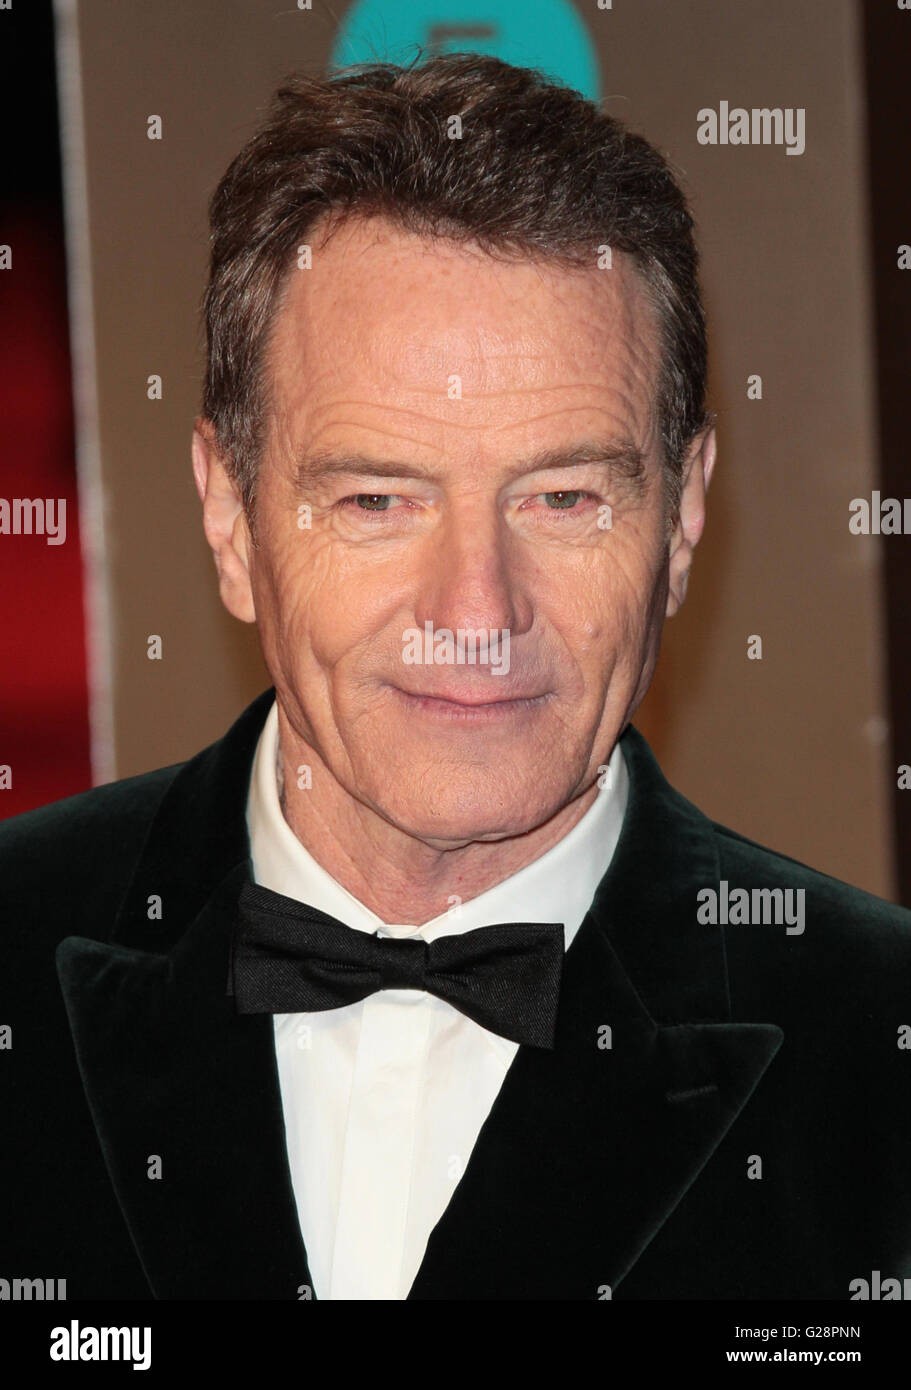 Bryan Cranston attends the EE Bafta British Academy Film Awards at the Royal Opera House on Feb 14, 2016 in London Stock Photo